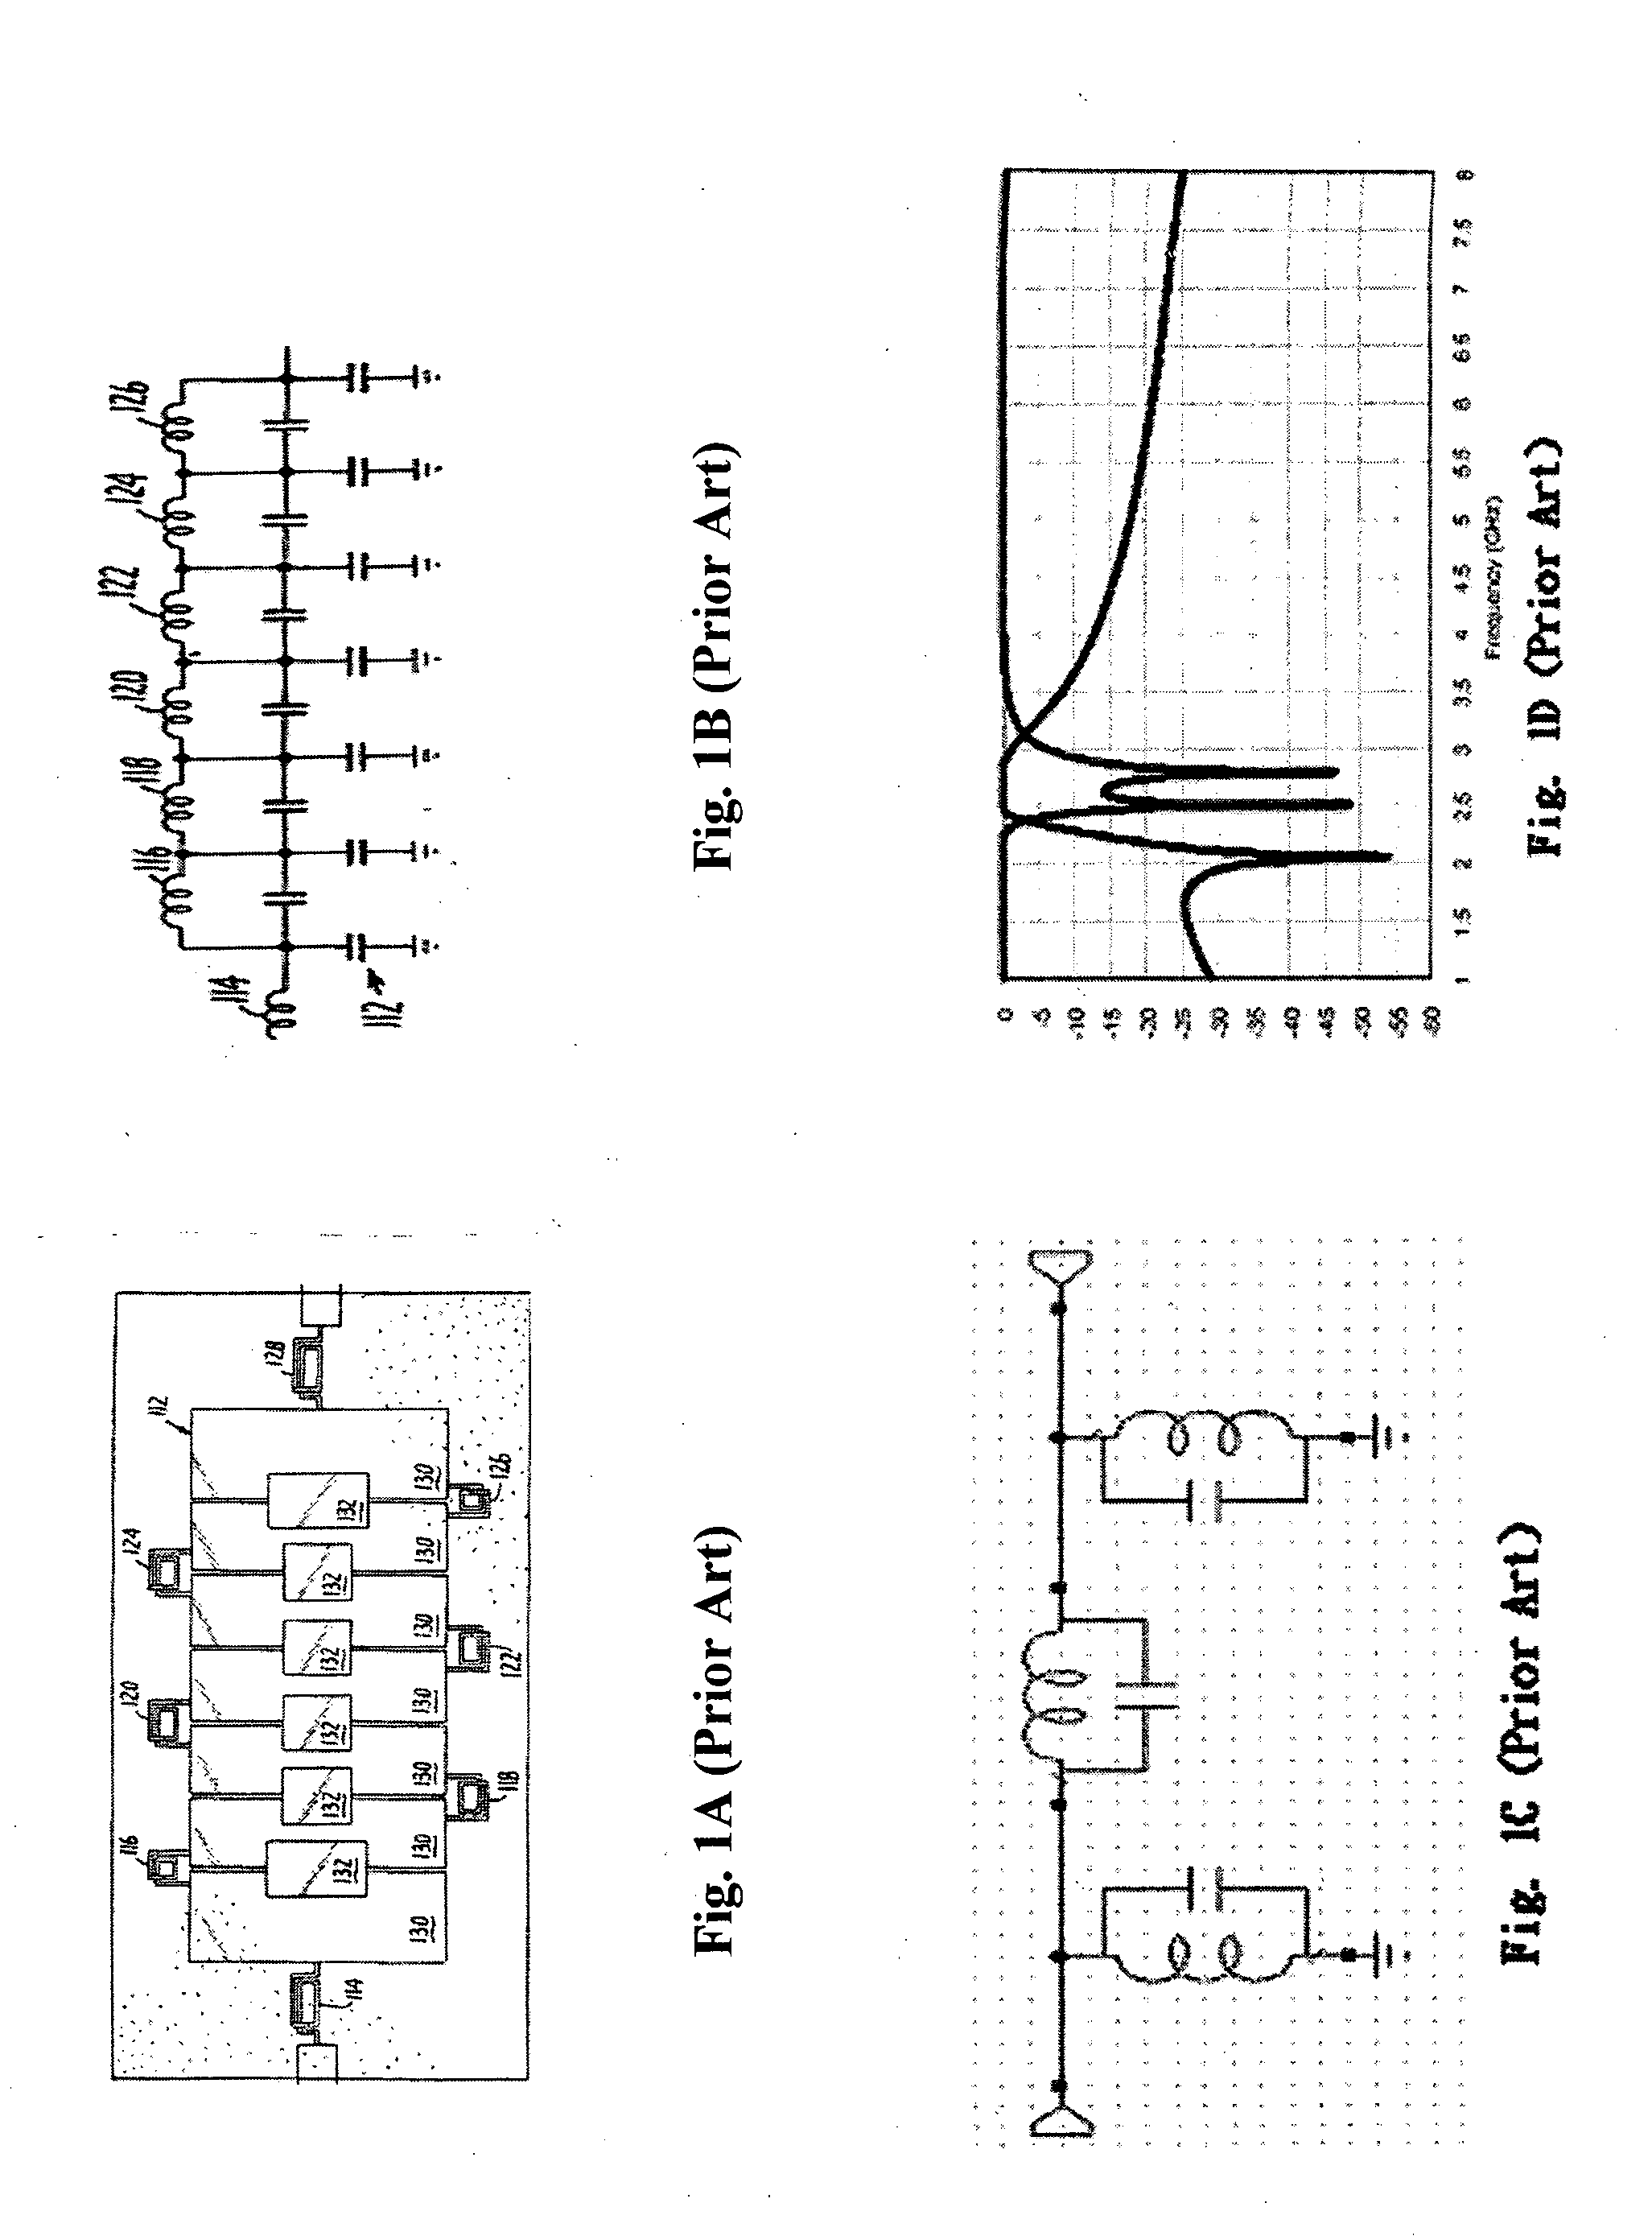 Circuits and manufacturing configurations of compact band-pass filter